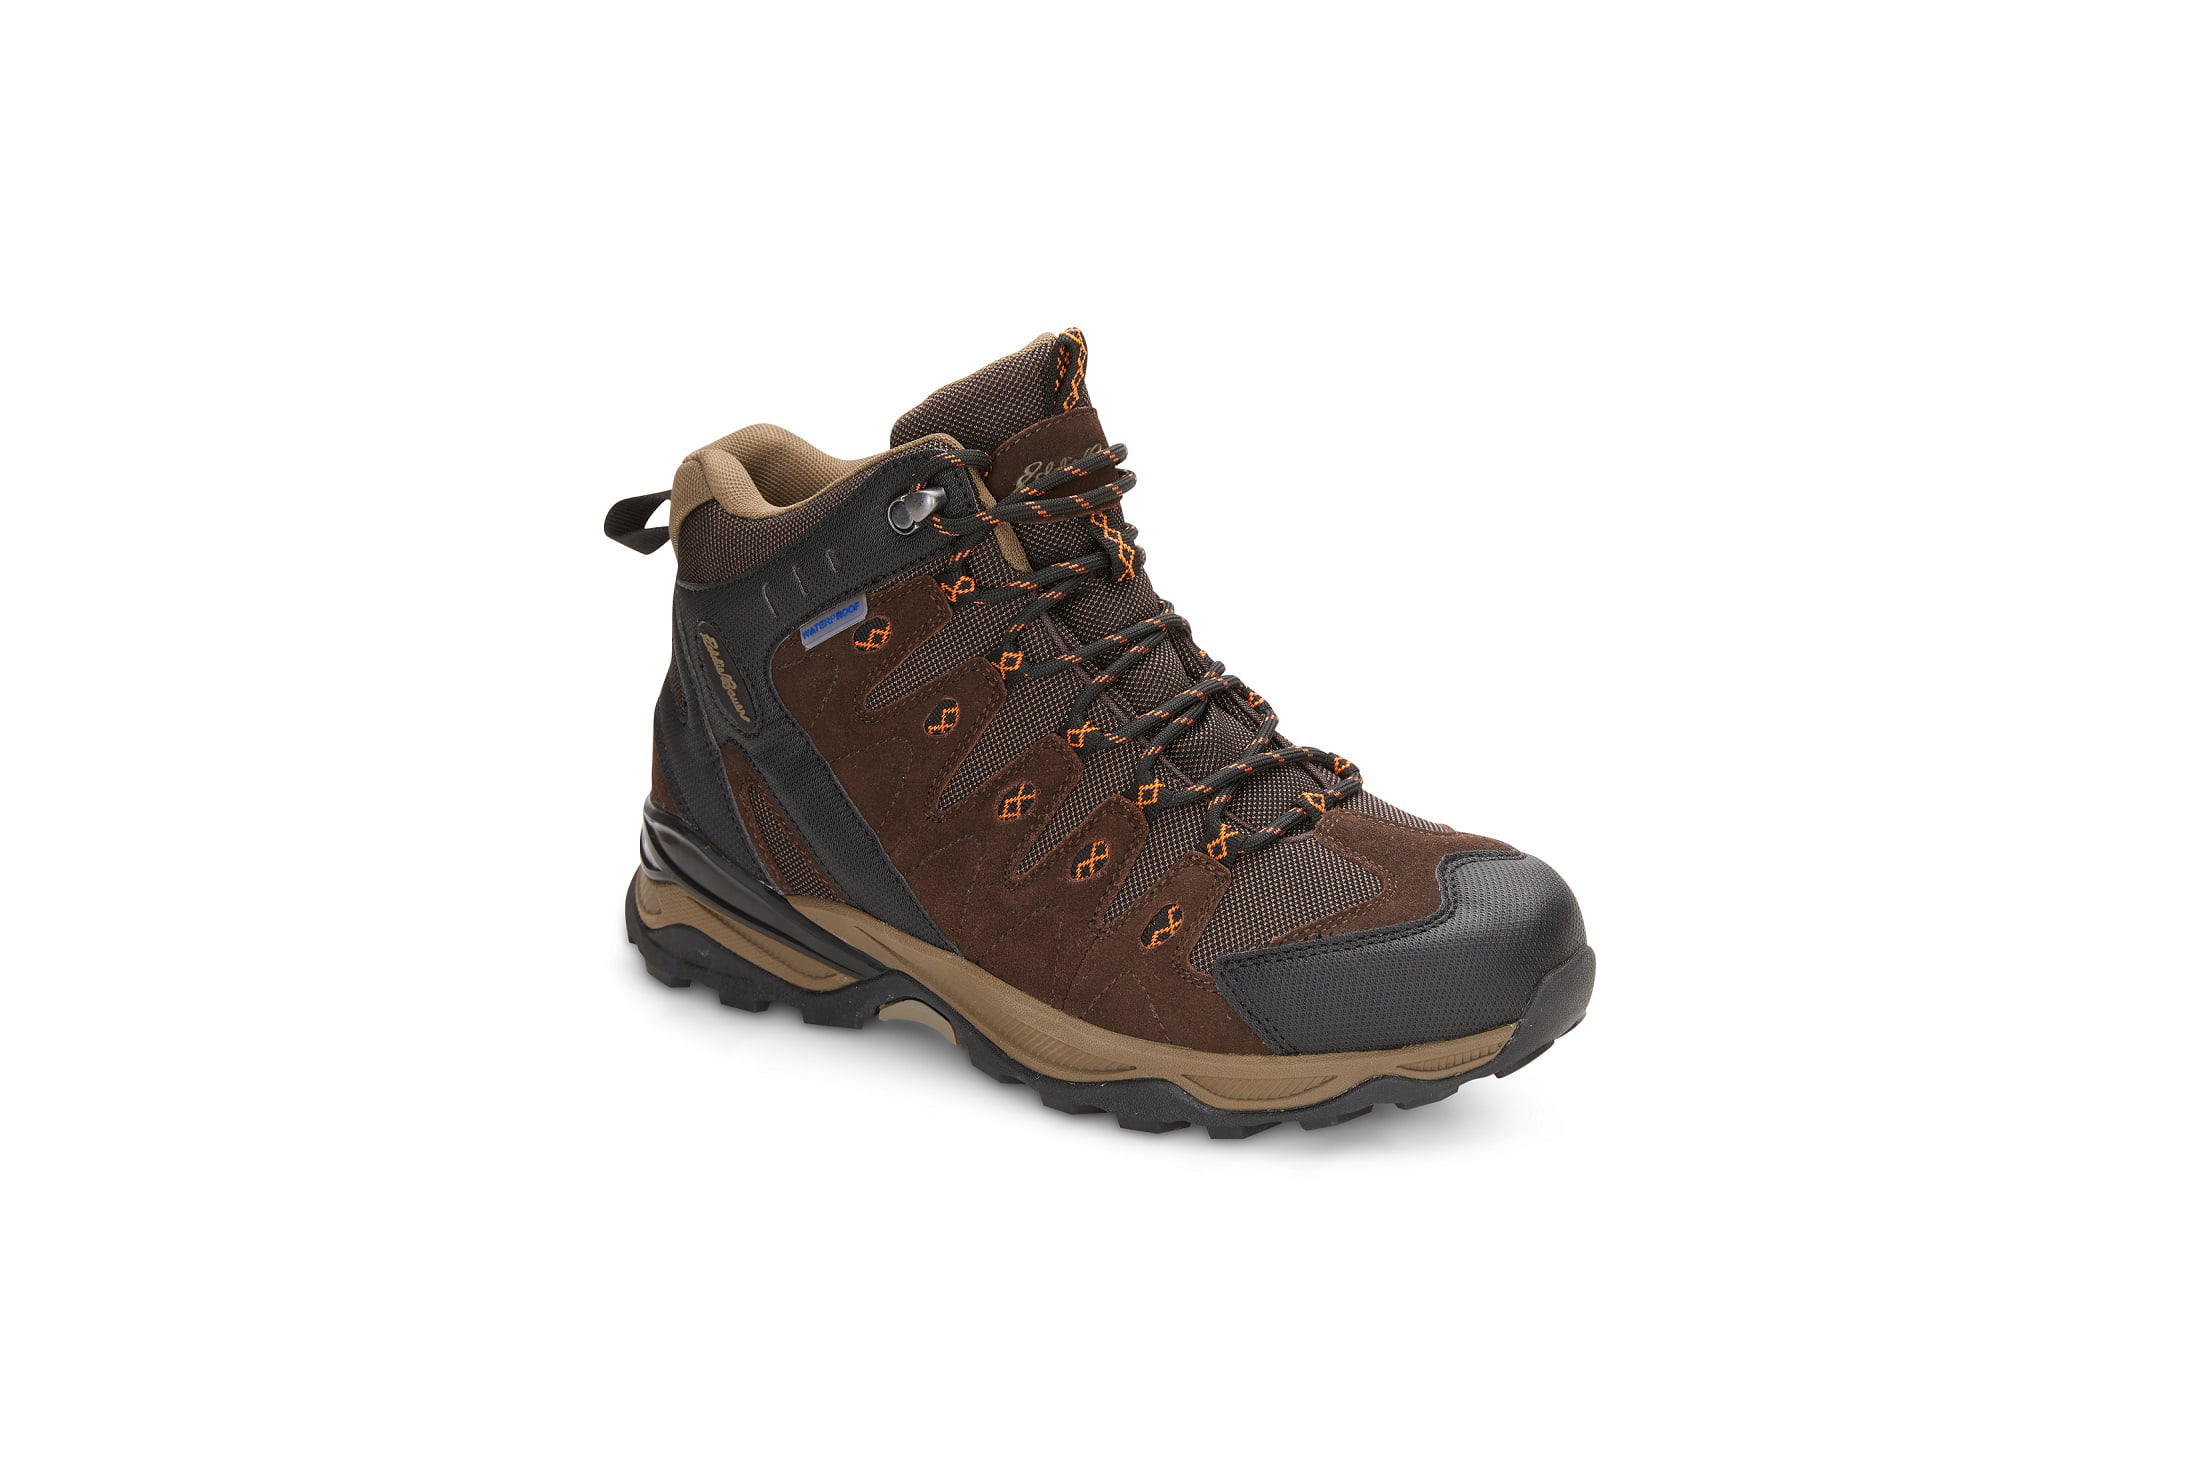 Eddie Bauer Men's Rockey Waterproof Hiking Boots Sturdy Design Rubber Traction Outsole 